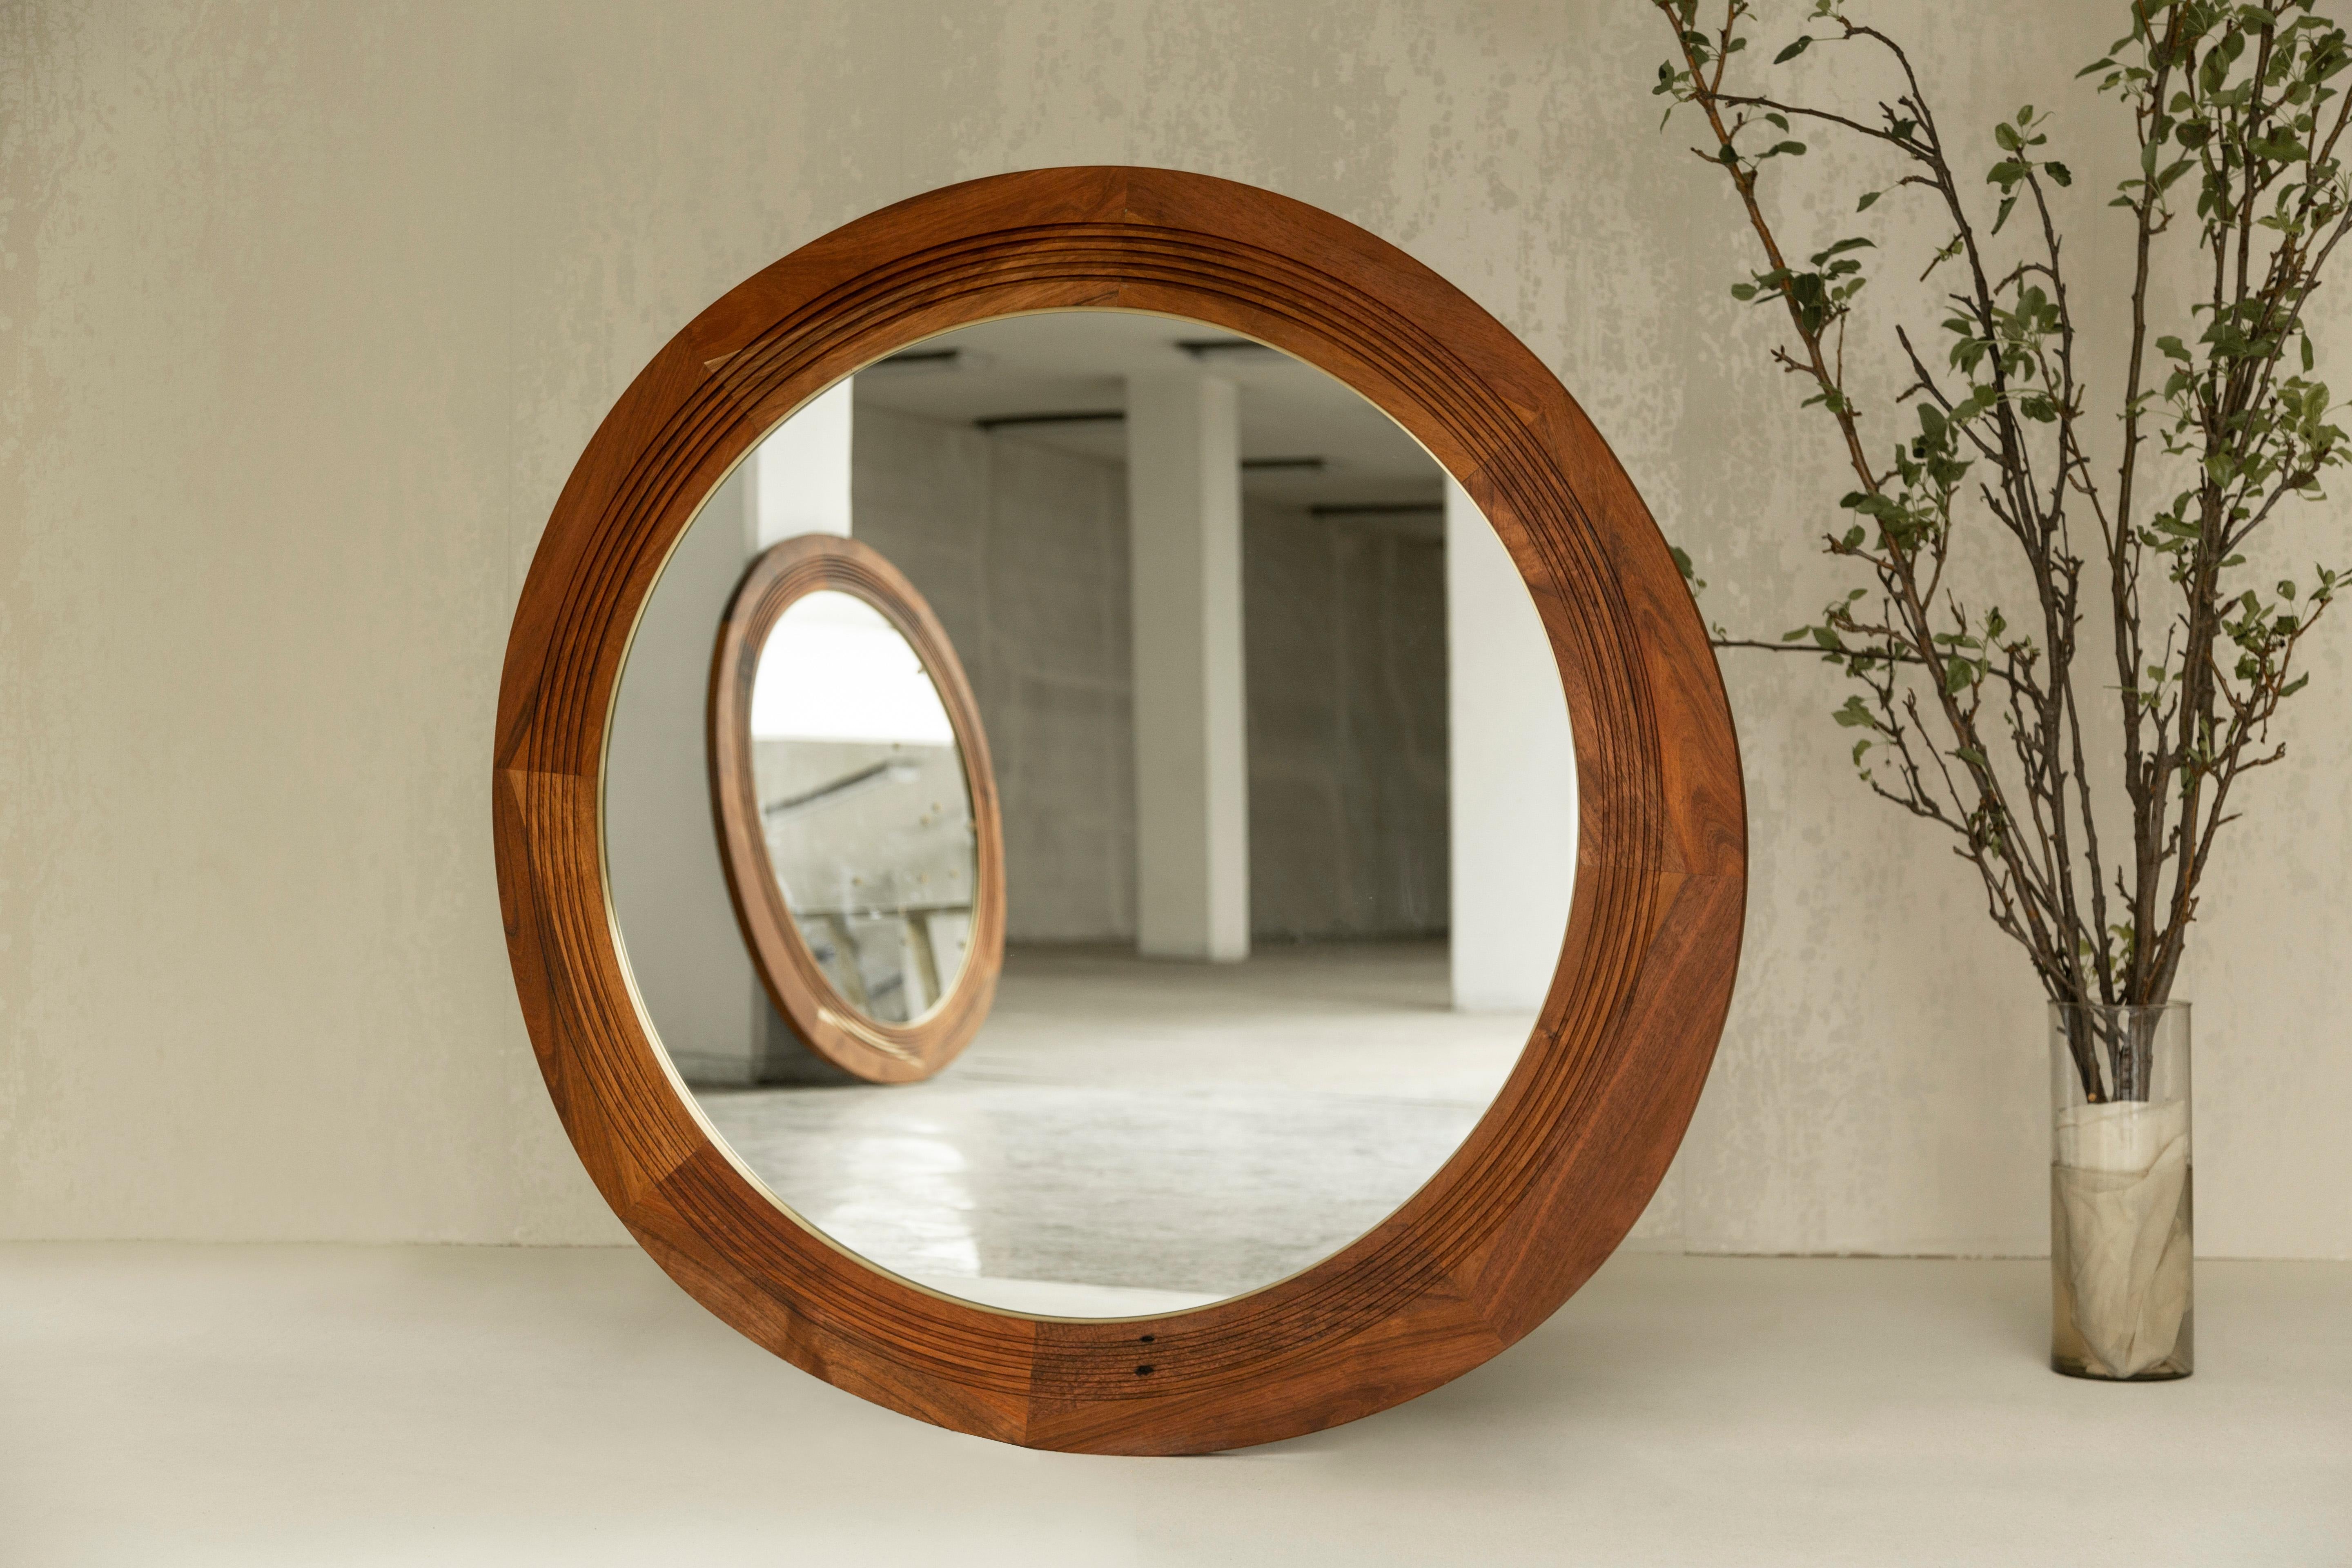 The Joseph mirror has brass detailing and beautiful patterns carved in the wood. The irregular shape makes for an interesting contrast with the inner circle. This mirror was named after Joseph Campbell in reference to ones own inner journey.